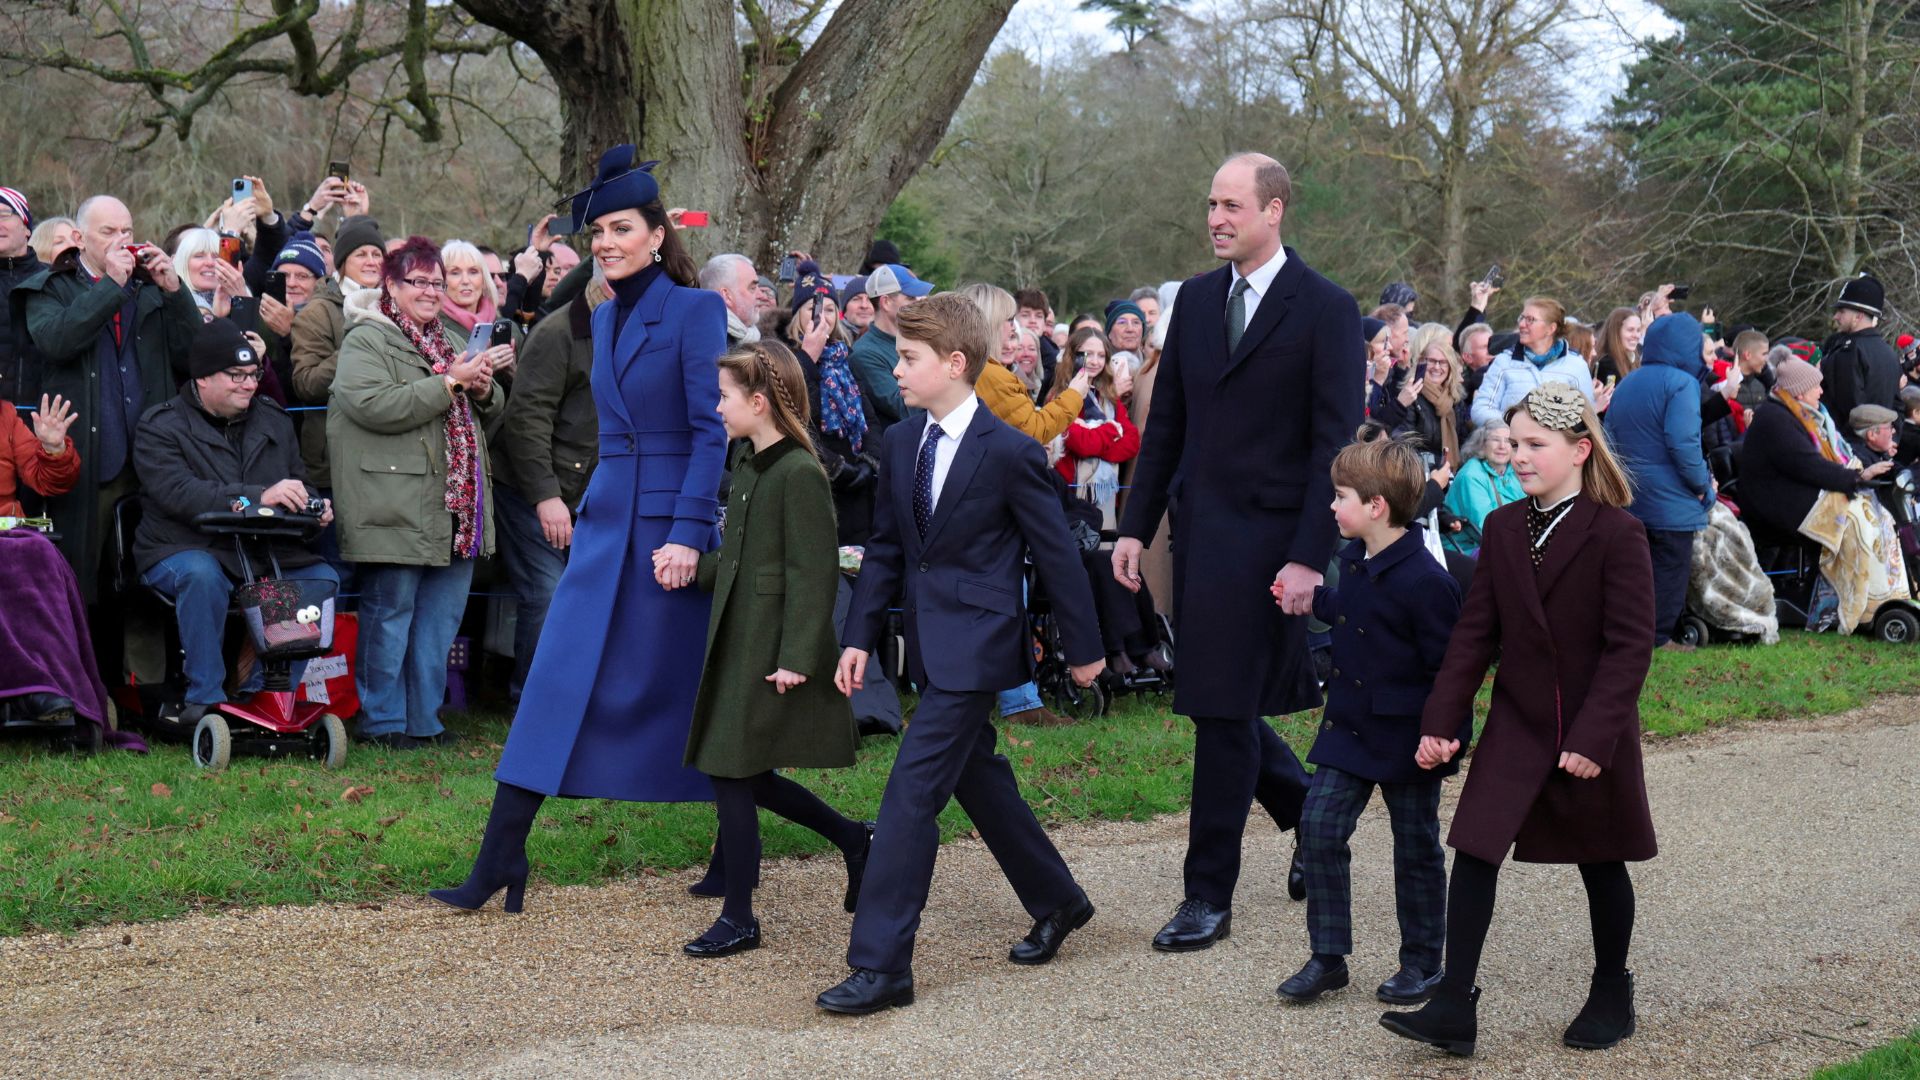 Heir to the throne Prince William has been looking after his children while his wife Kate recovered from an operation. Now he may step up to take on some of his father's duties. /Chris Radburn/Reuters